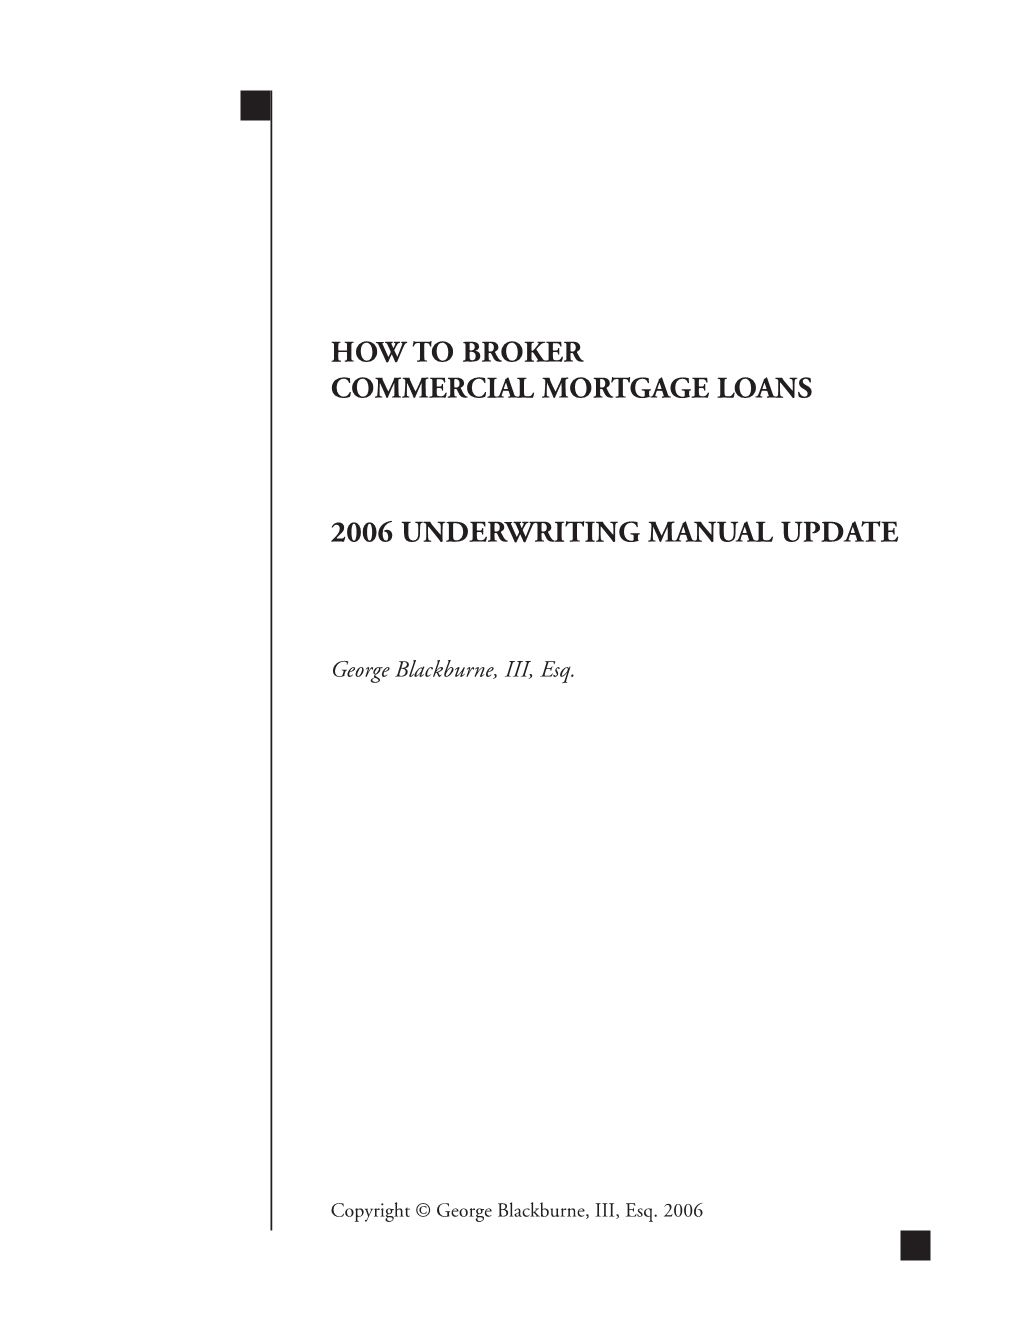 How to Broker Commercial Mortgage Loans 2006 Underwriting Manual